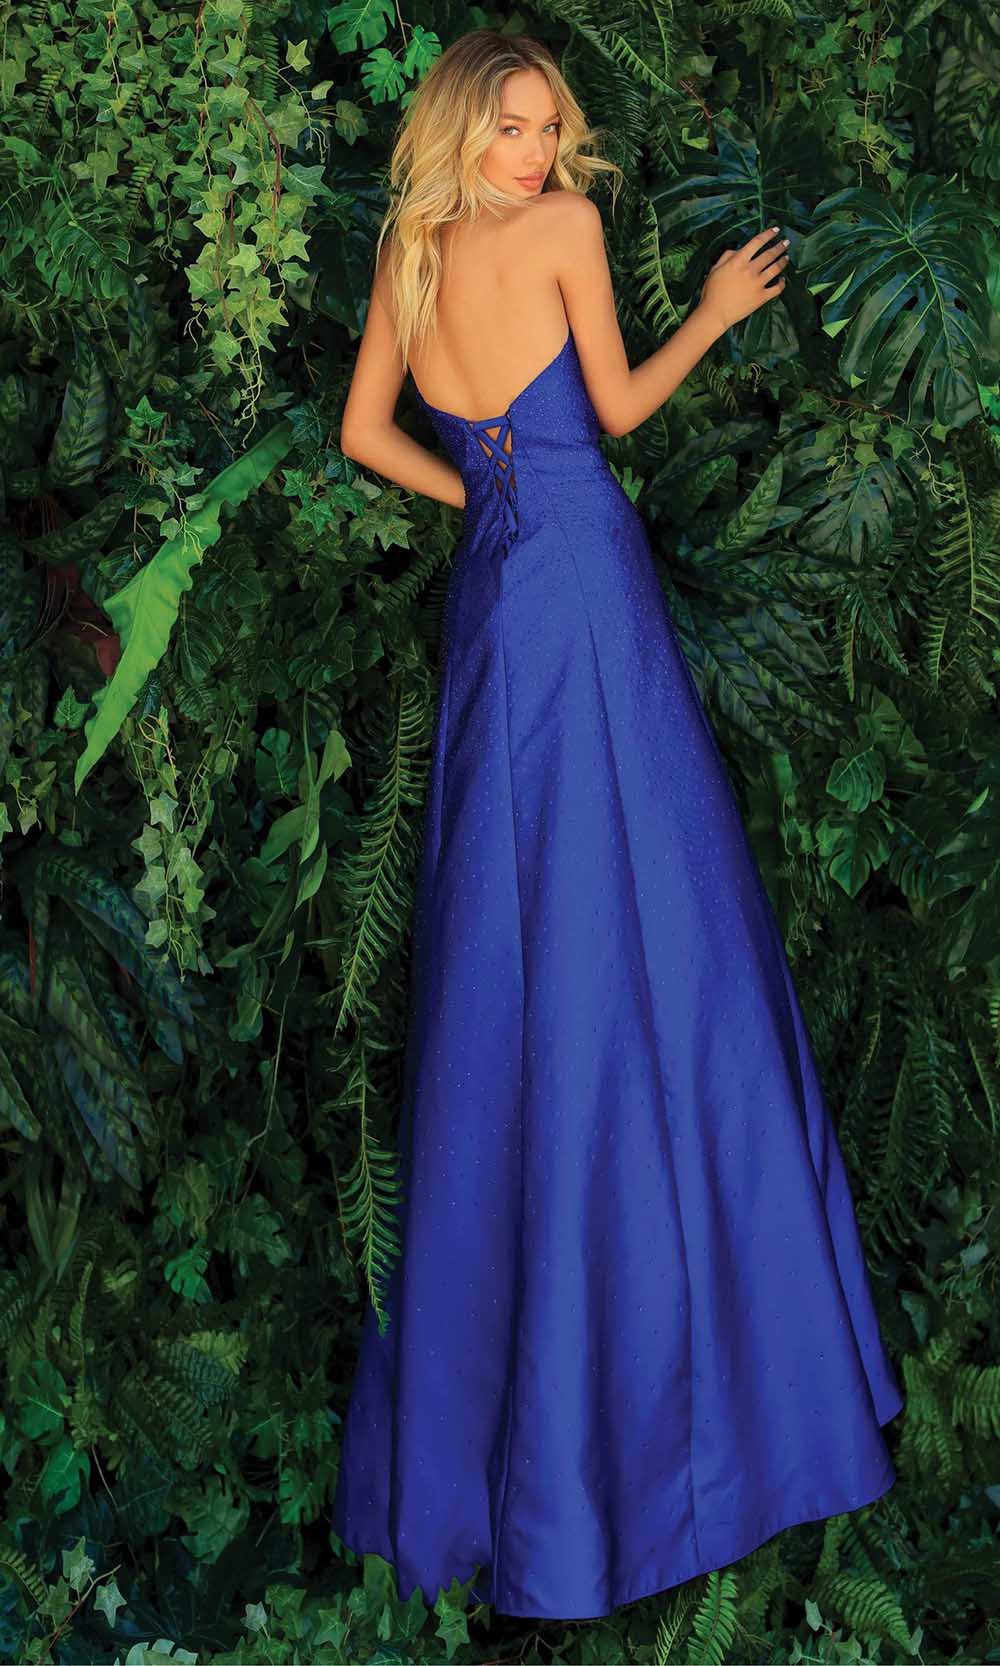 Clarisse - 810201 Strapless Sweetheart A-Line Gown Prom Dresses 2 / Cobalt